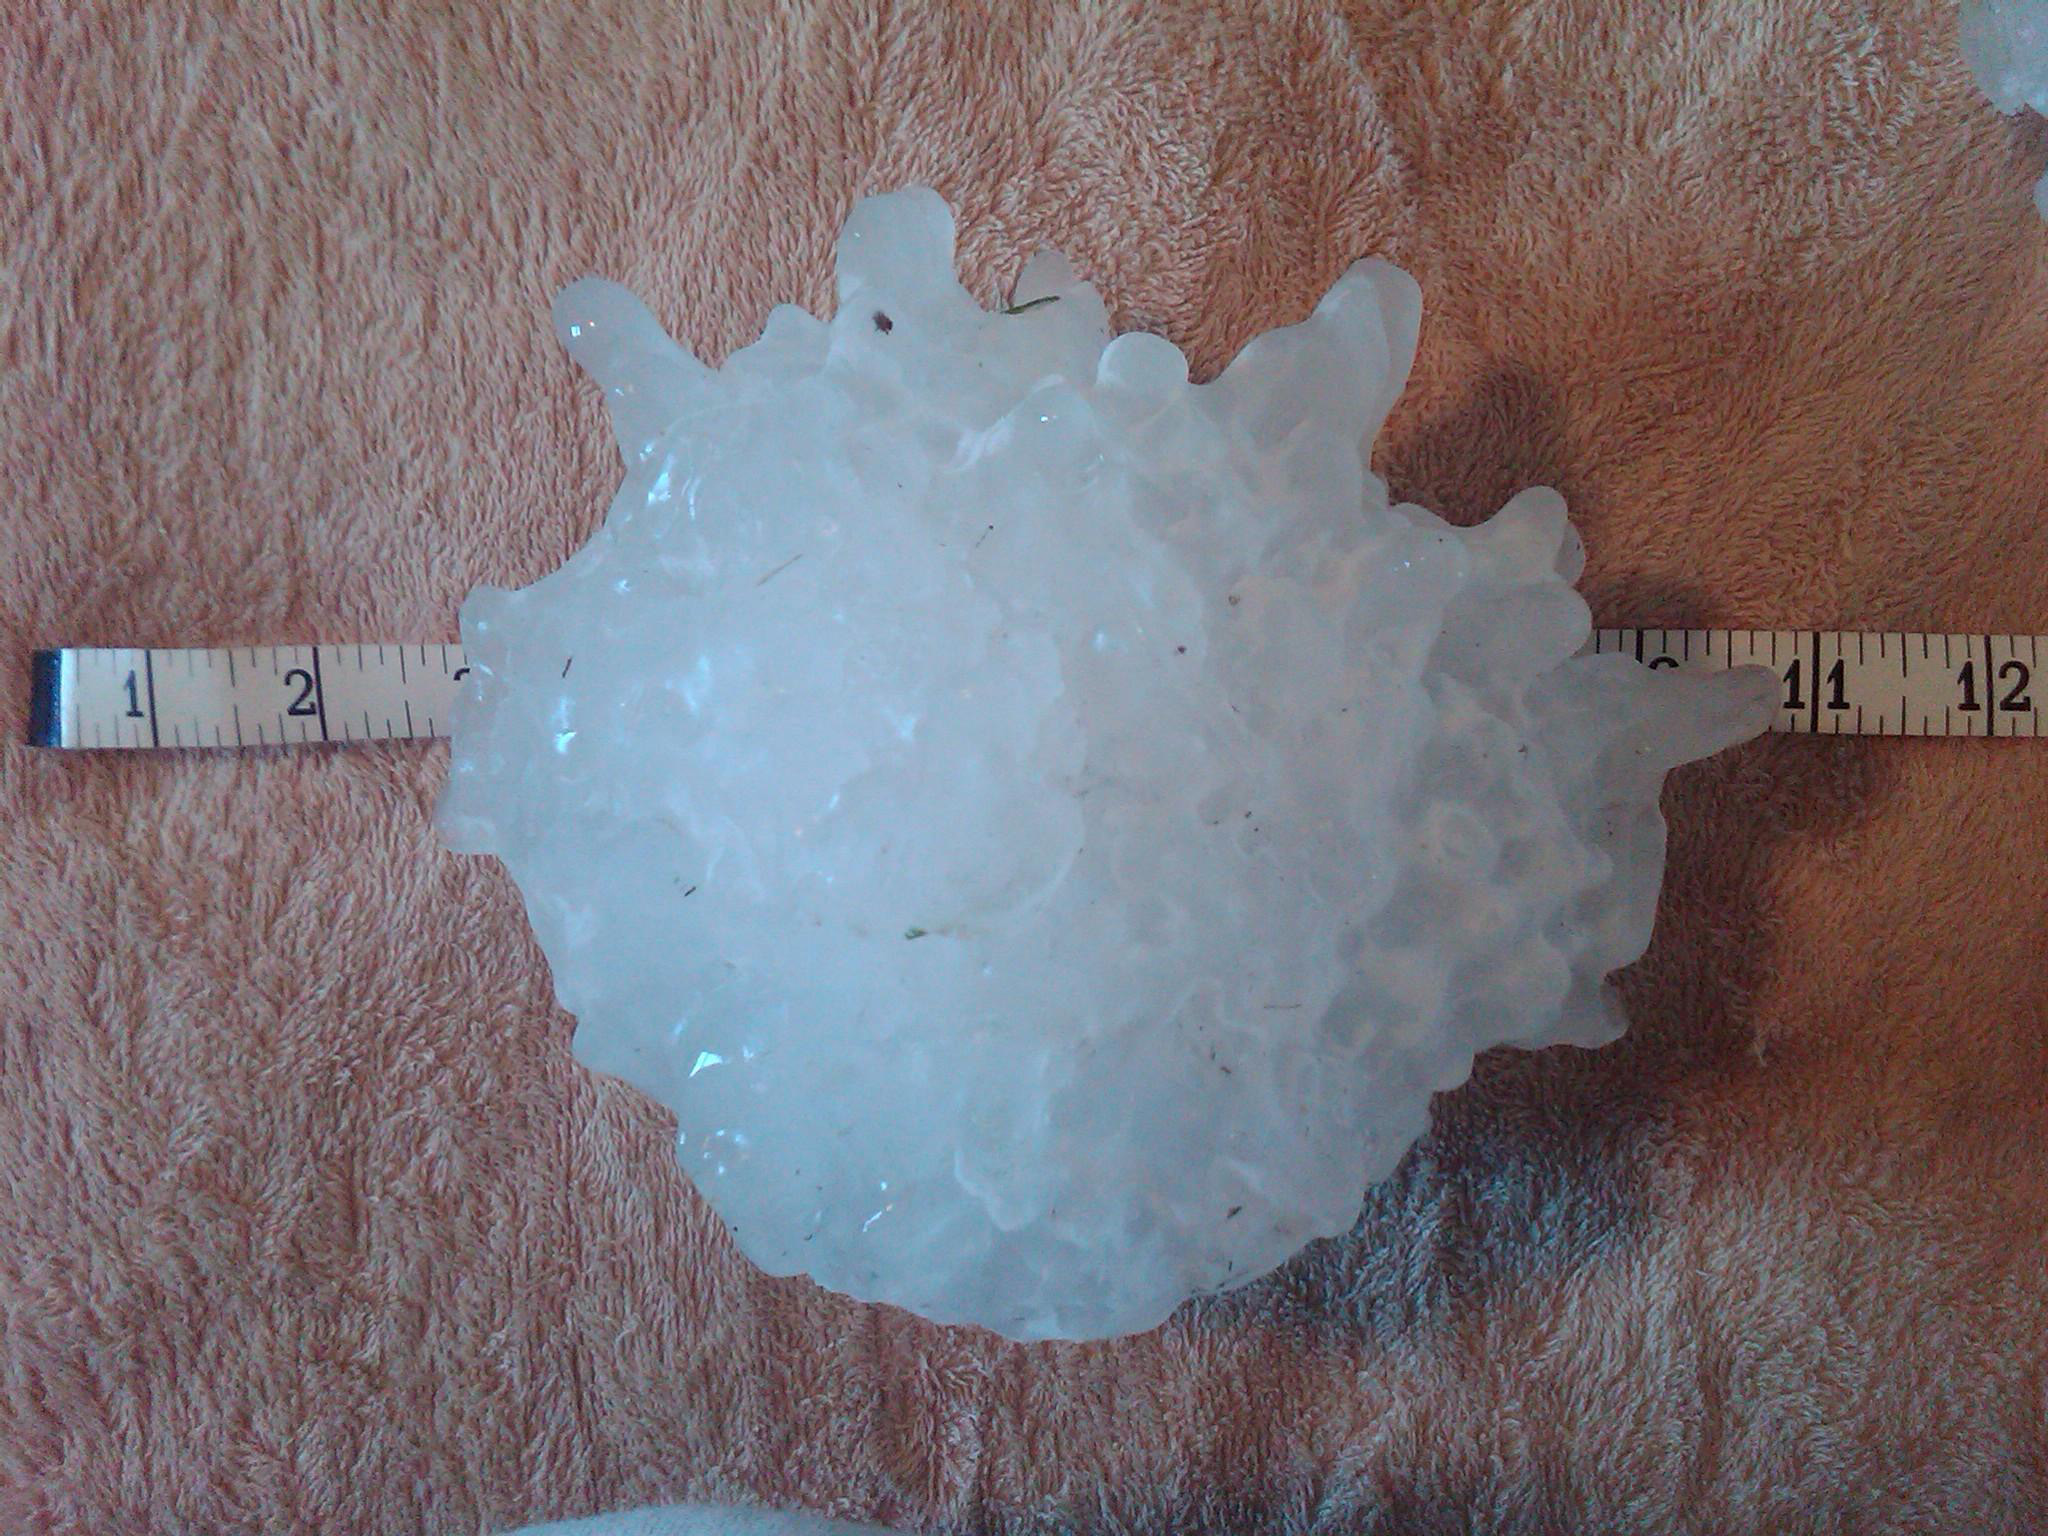 close up view of the largest piece of hail ever recorded